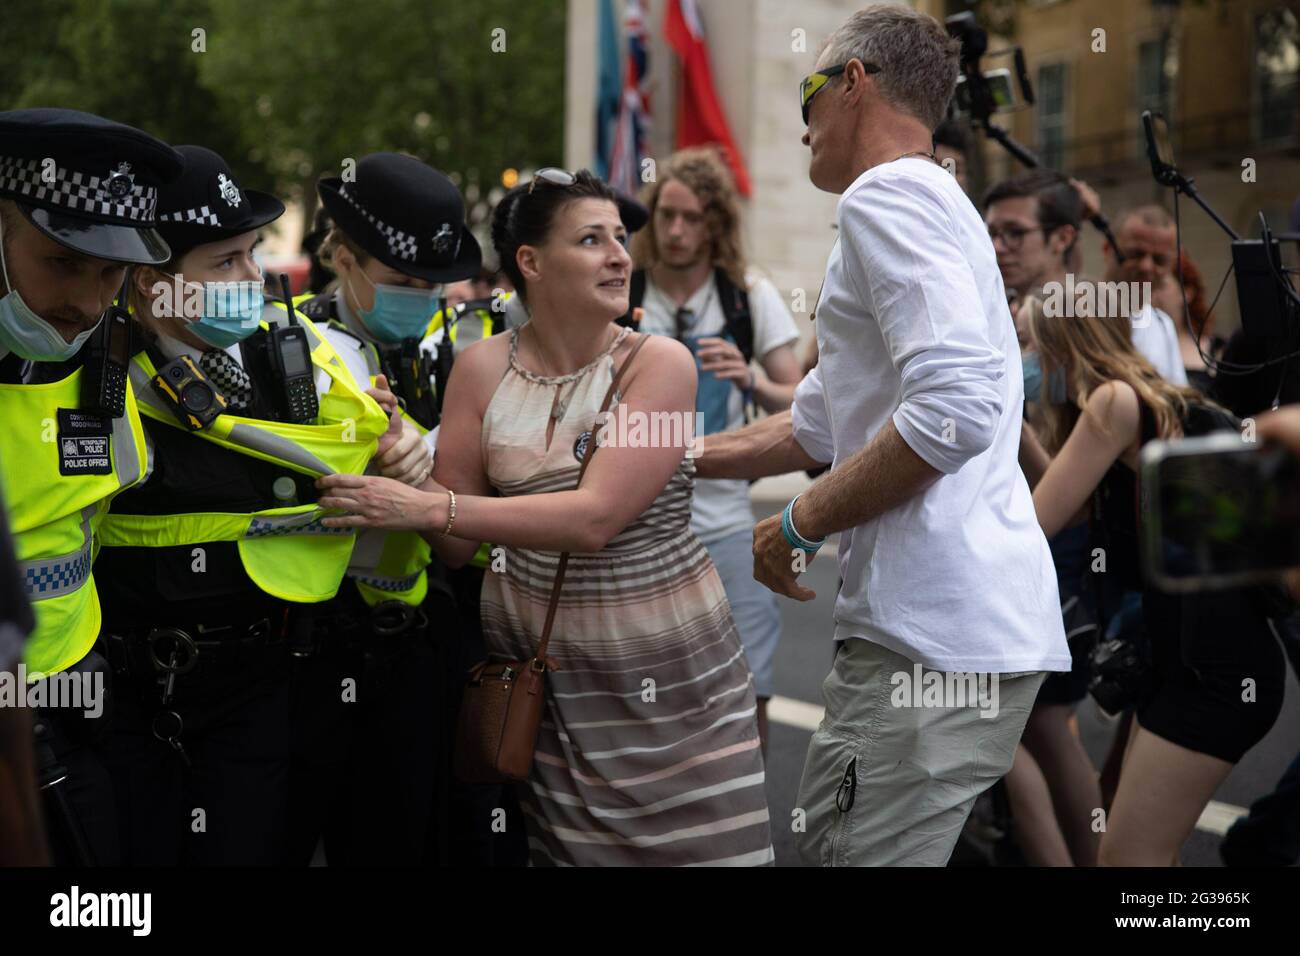 London, UK. 14th June 2021. Anti-vaxx protester trys to stop the Met Police from pushing forward outside Downing Street. Yuen Ching Ng/Alamy Live News. Stock Photo